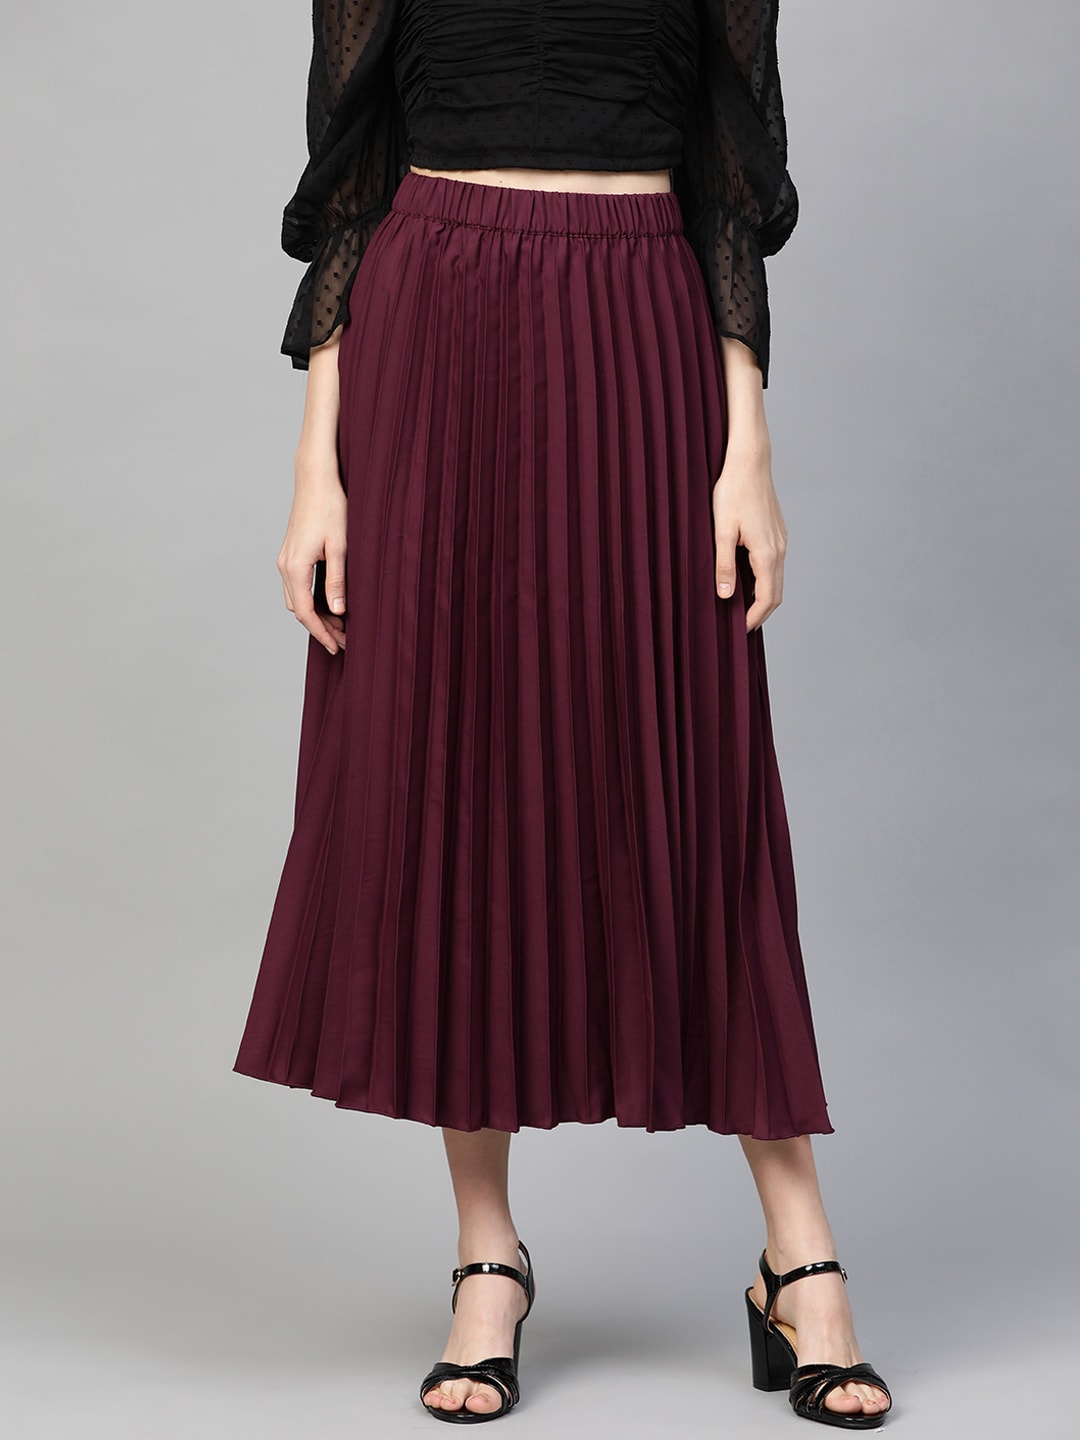 plusS Burgundy Accordion Pleated A-Line Skirt Price in India